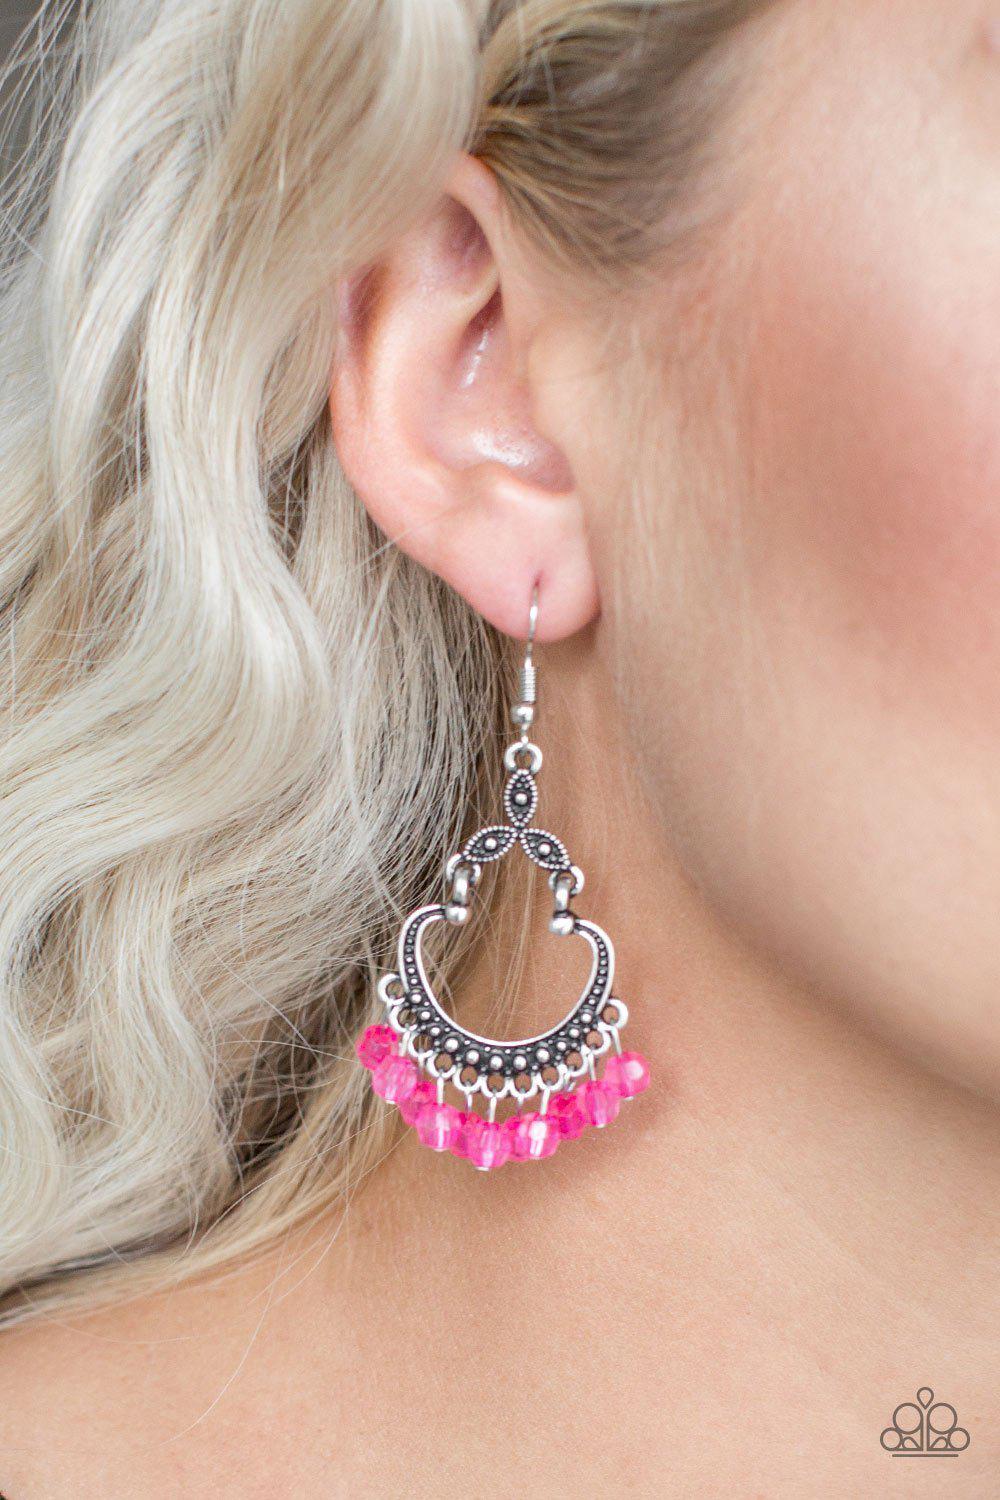 Babe Alert Pink Earrings - Paparazzi Accessories - model -CarasShop.com - $5 Jewelry by Cara Jewels